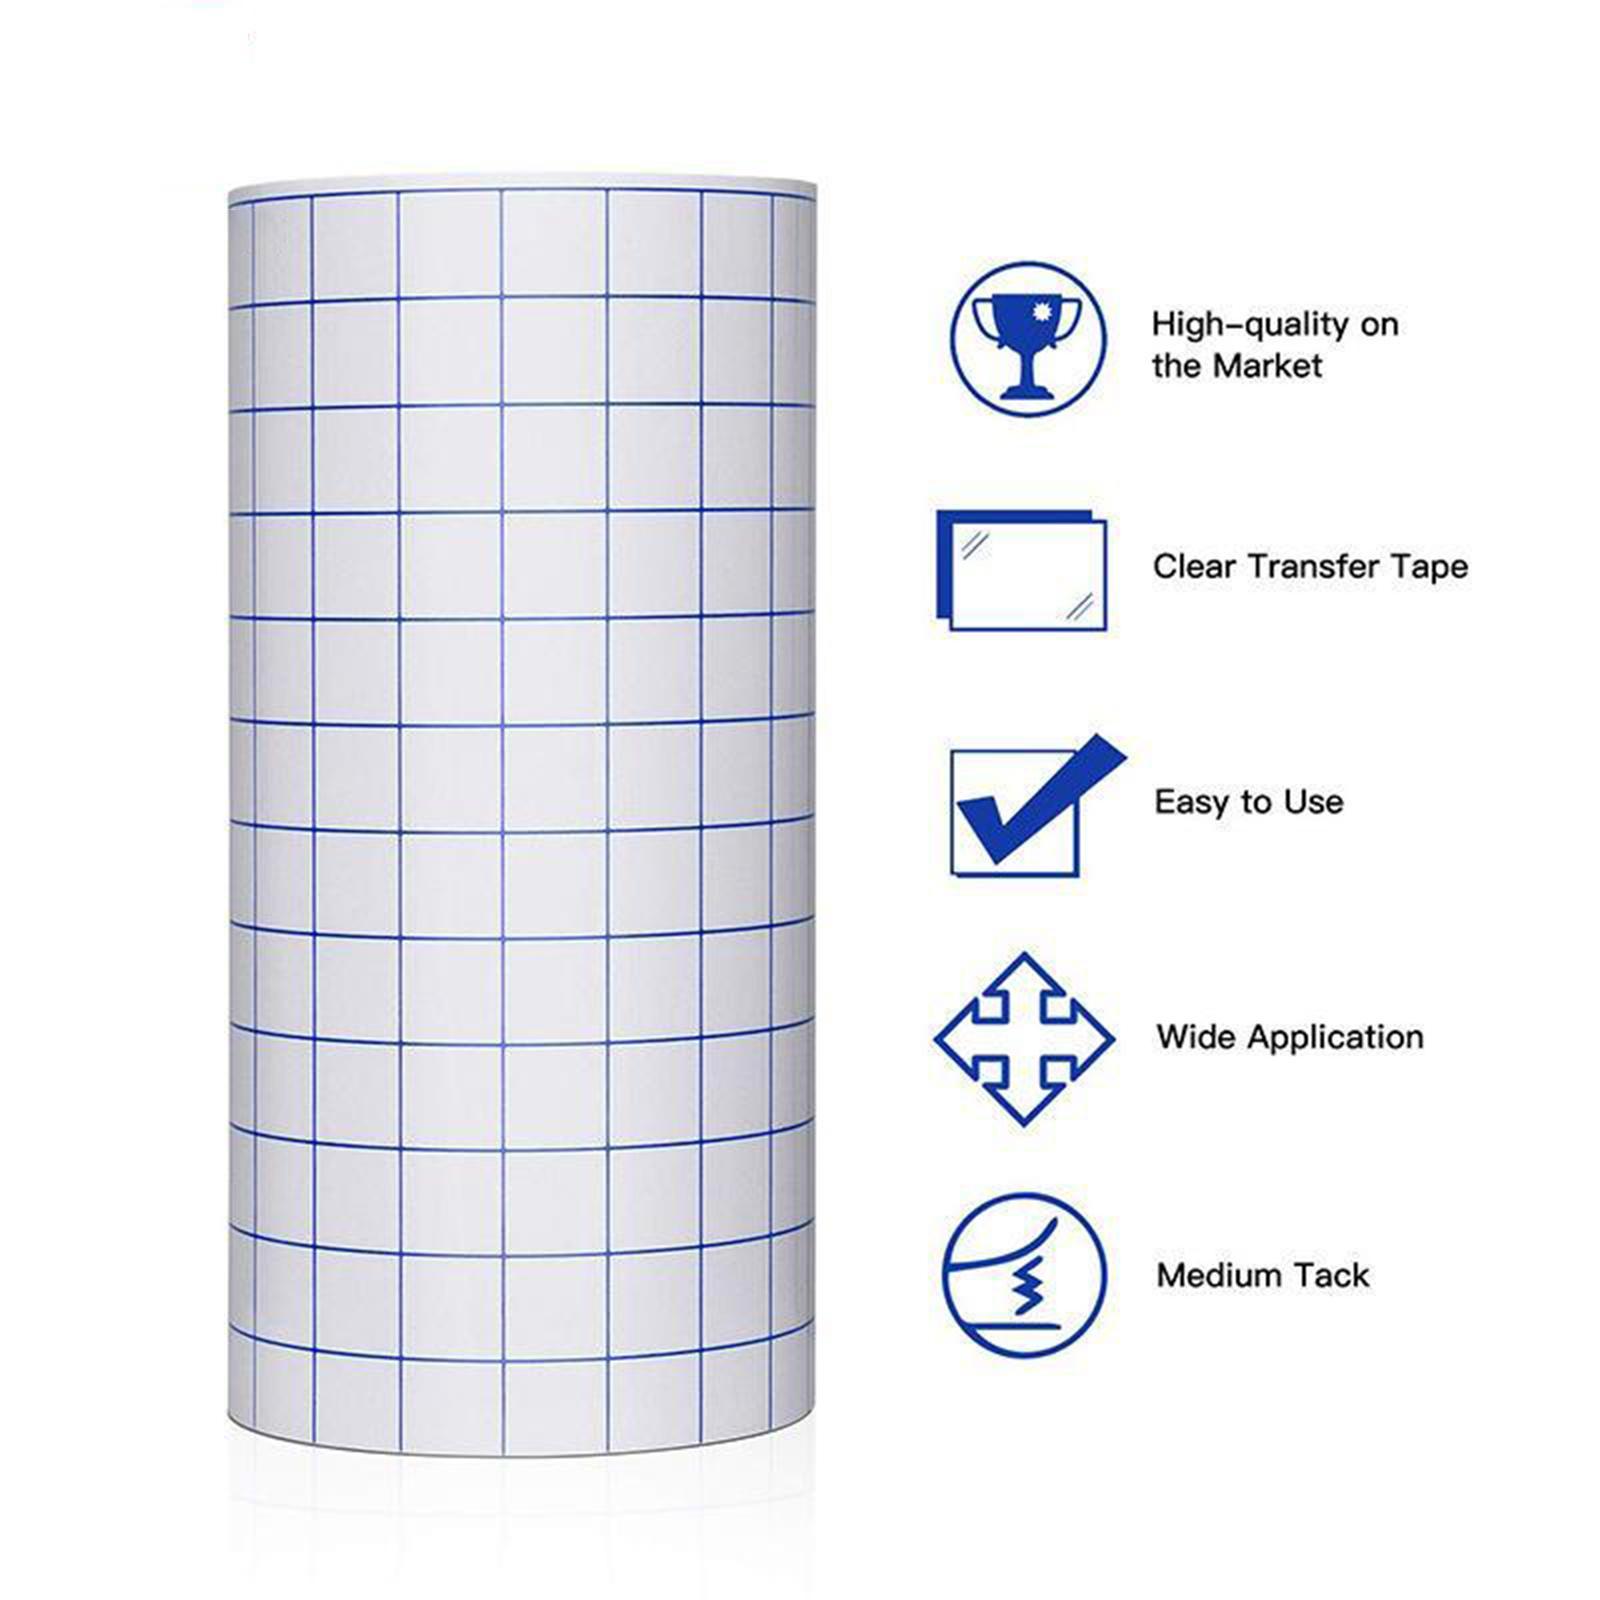 12"x3.28 Feet  Transfer Tape w/ Grid for Adhesive   Transfer Tape